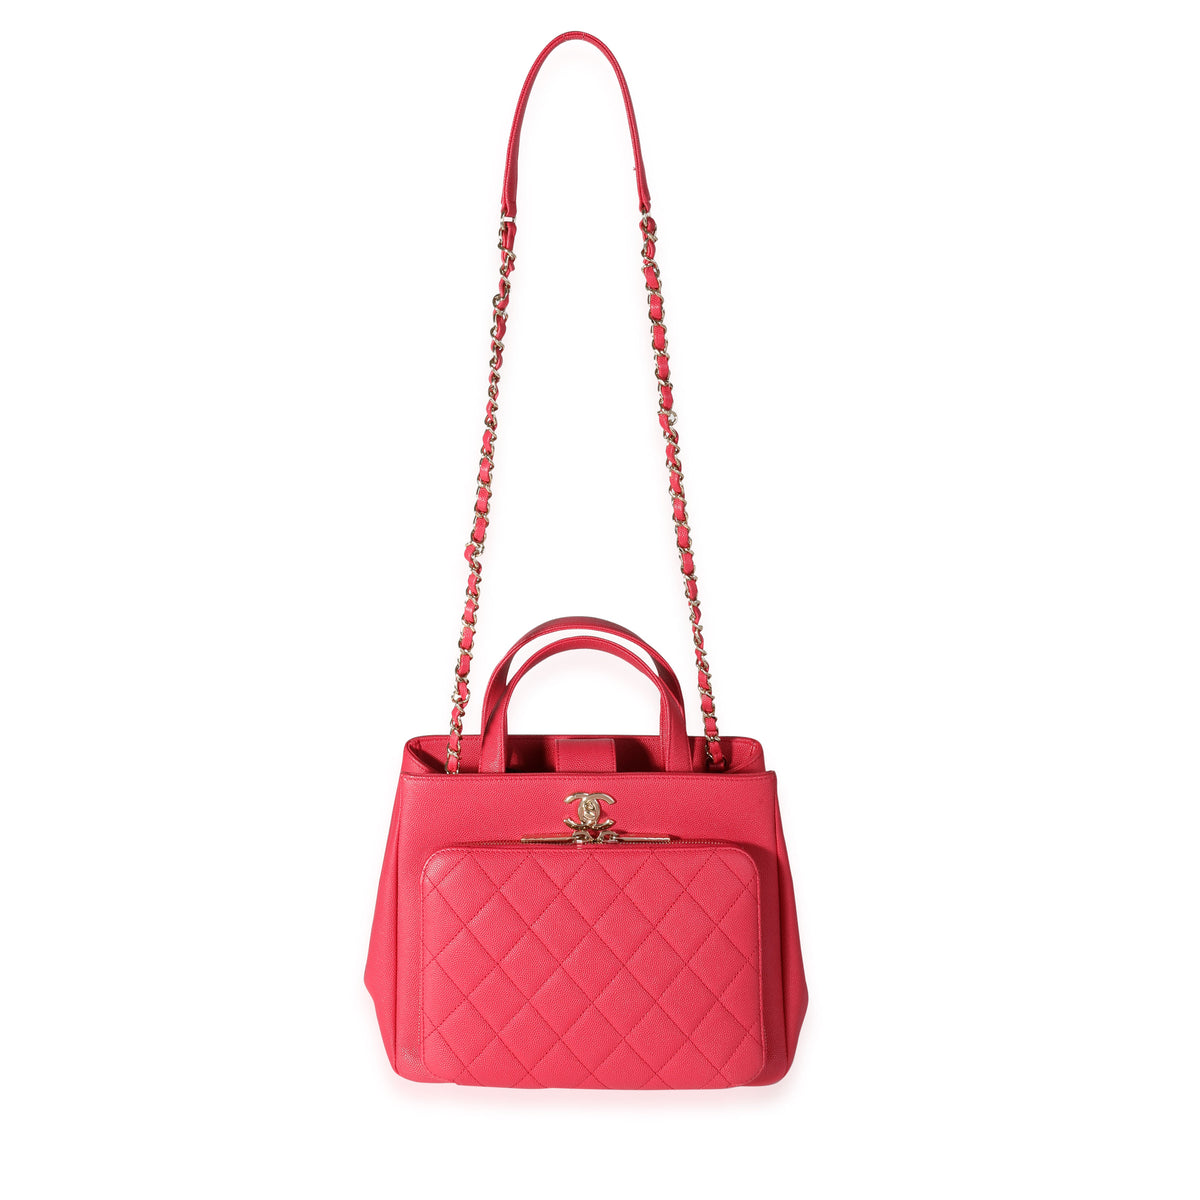 Chanel Red Caviar Quilted Small Business Affinity Shopping Bag